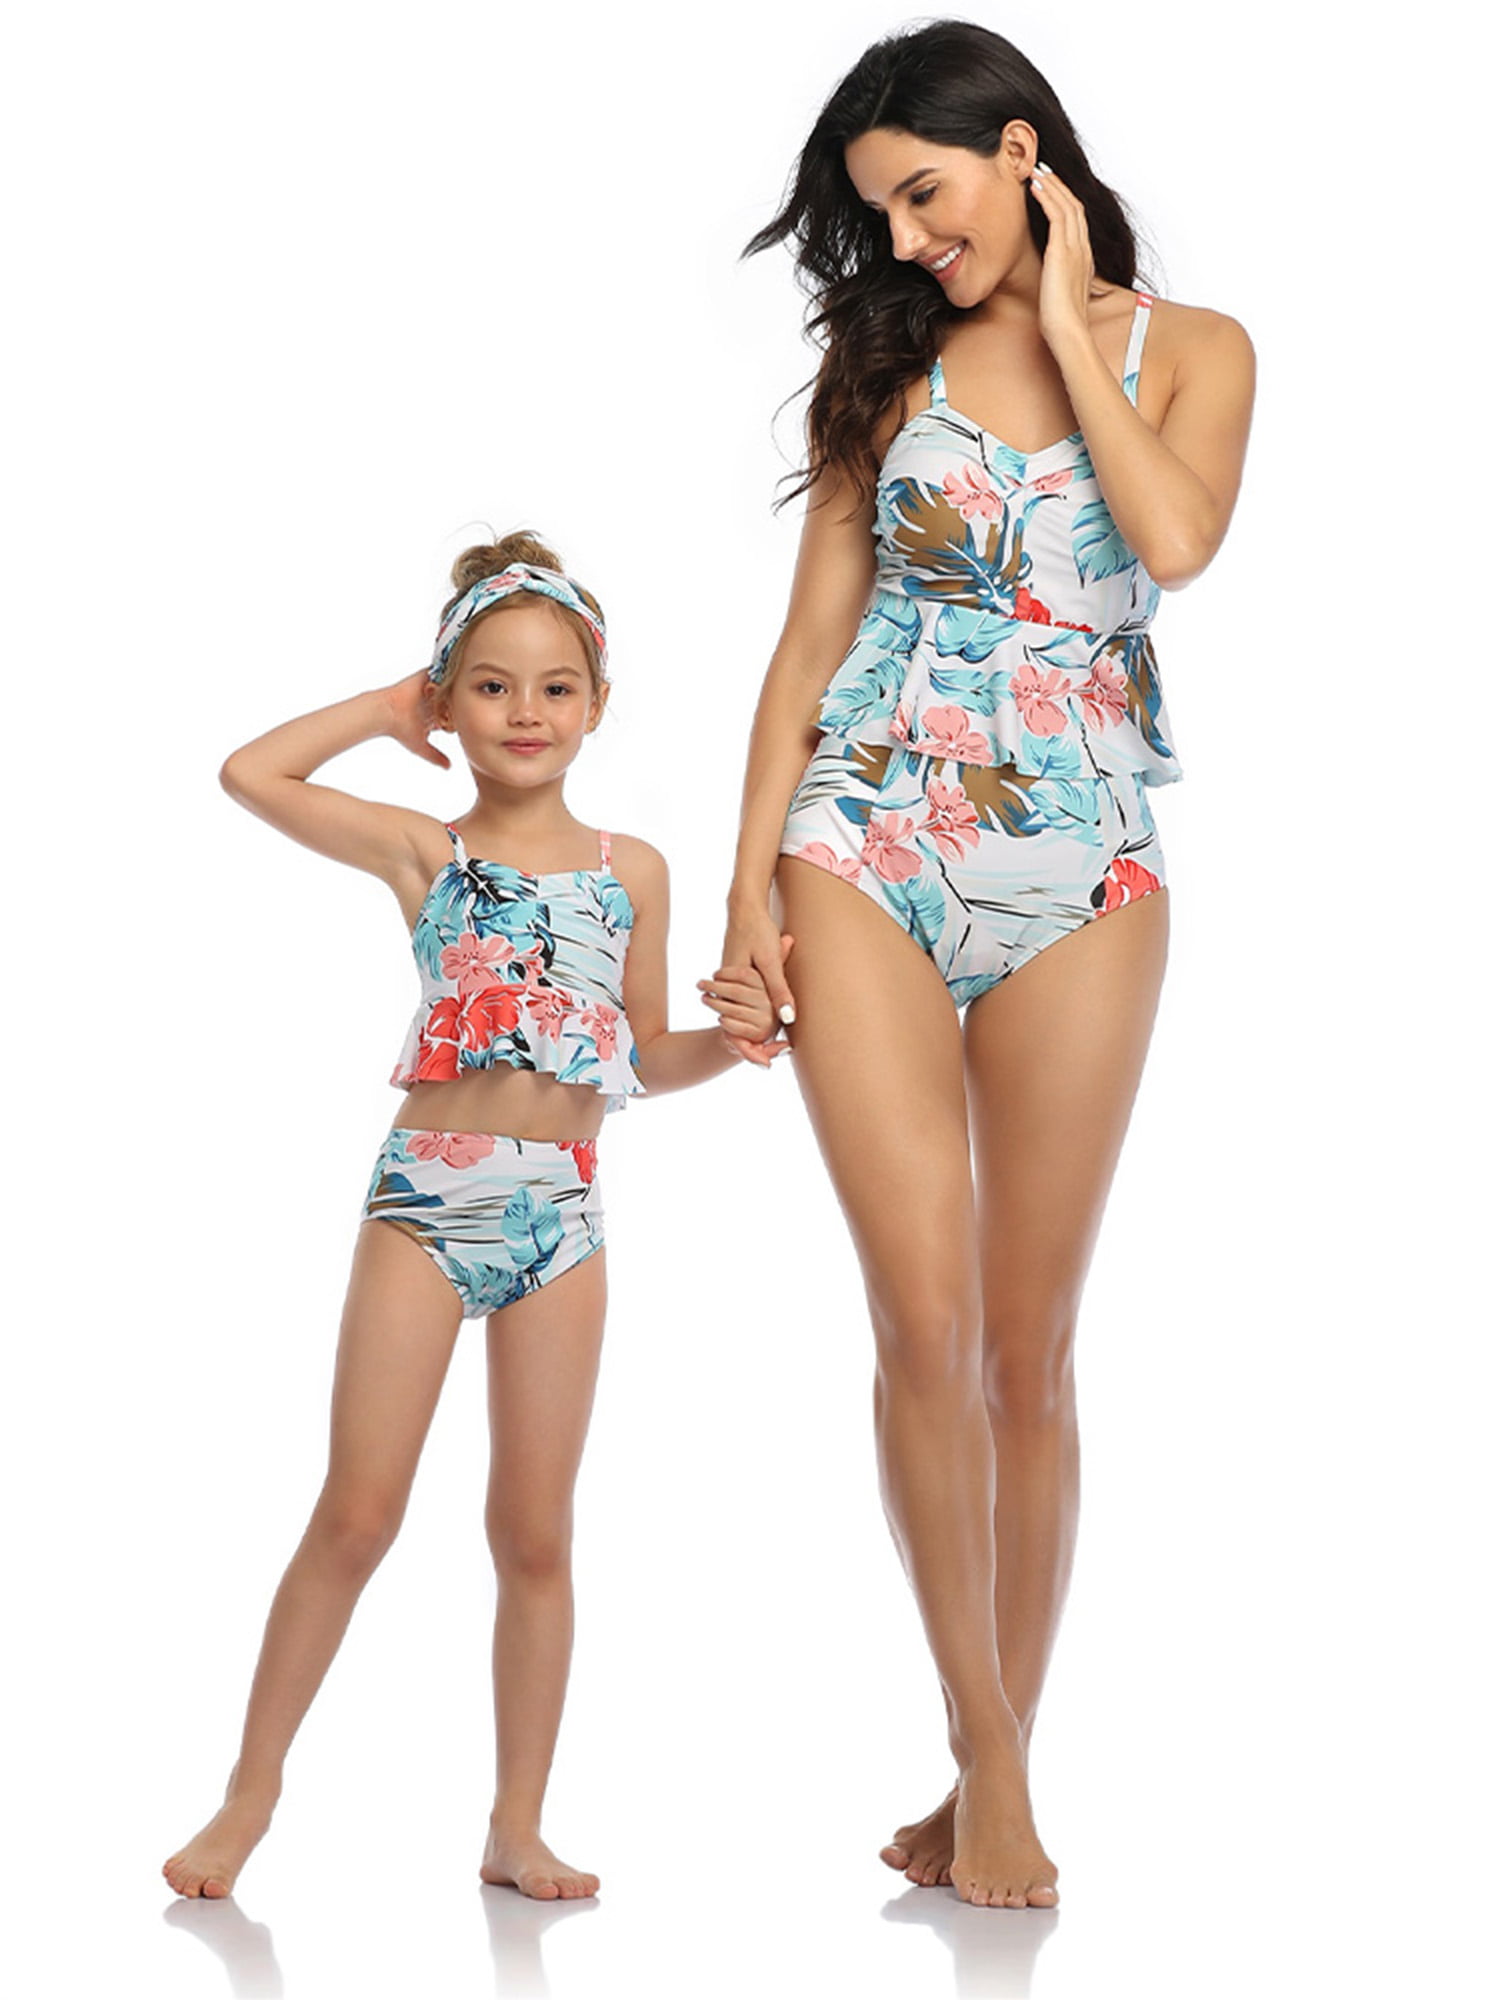 Boys Sailor Surf Suit Swimsuit Beach Swimming Pool Toddler 